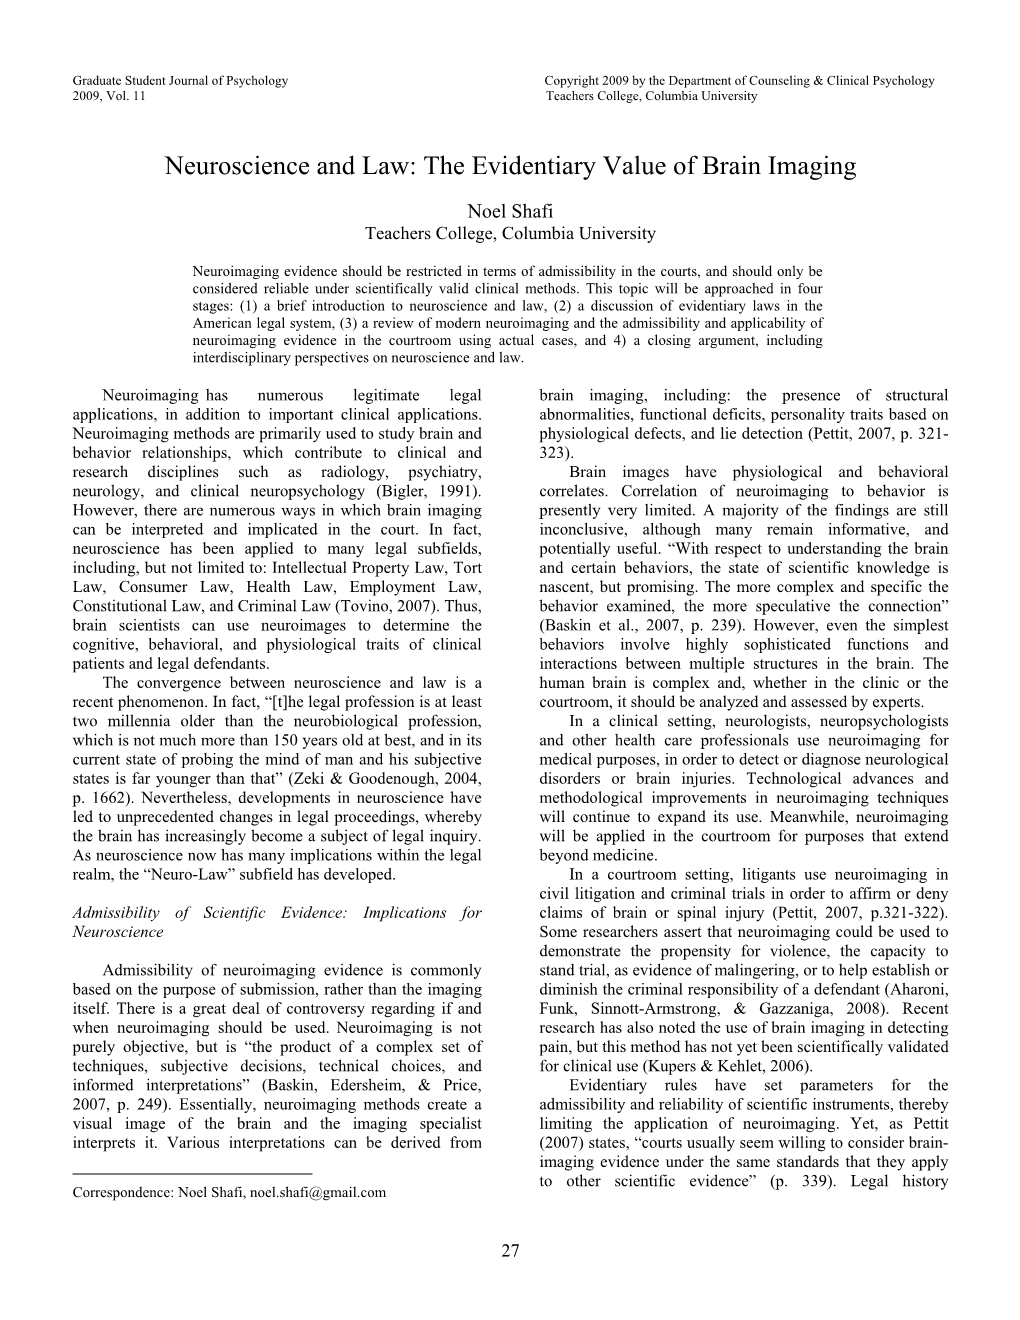 Neuroscience and Law: the Evidentiary Value of Brain Imaging